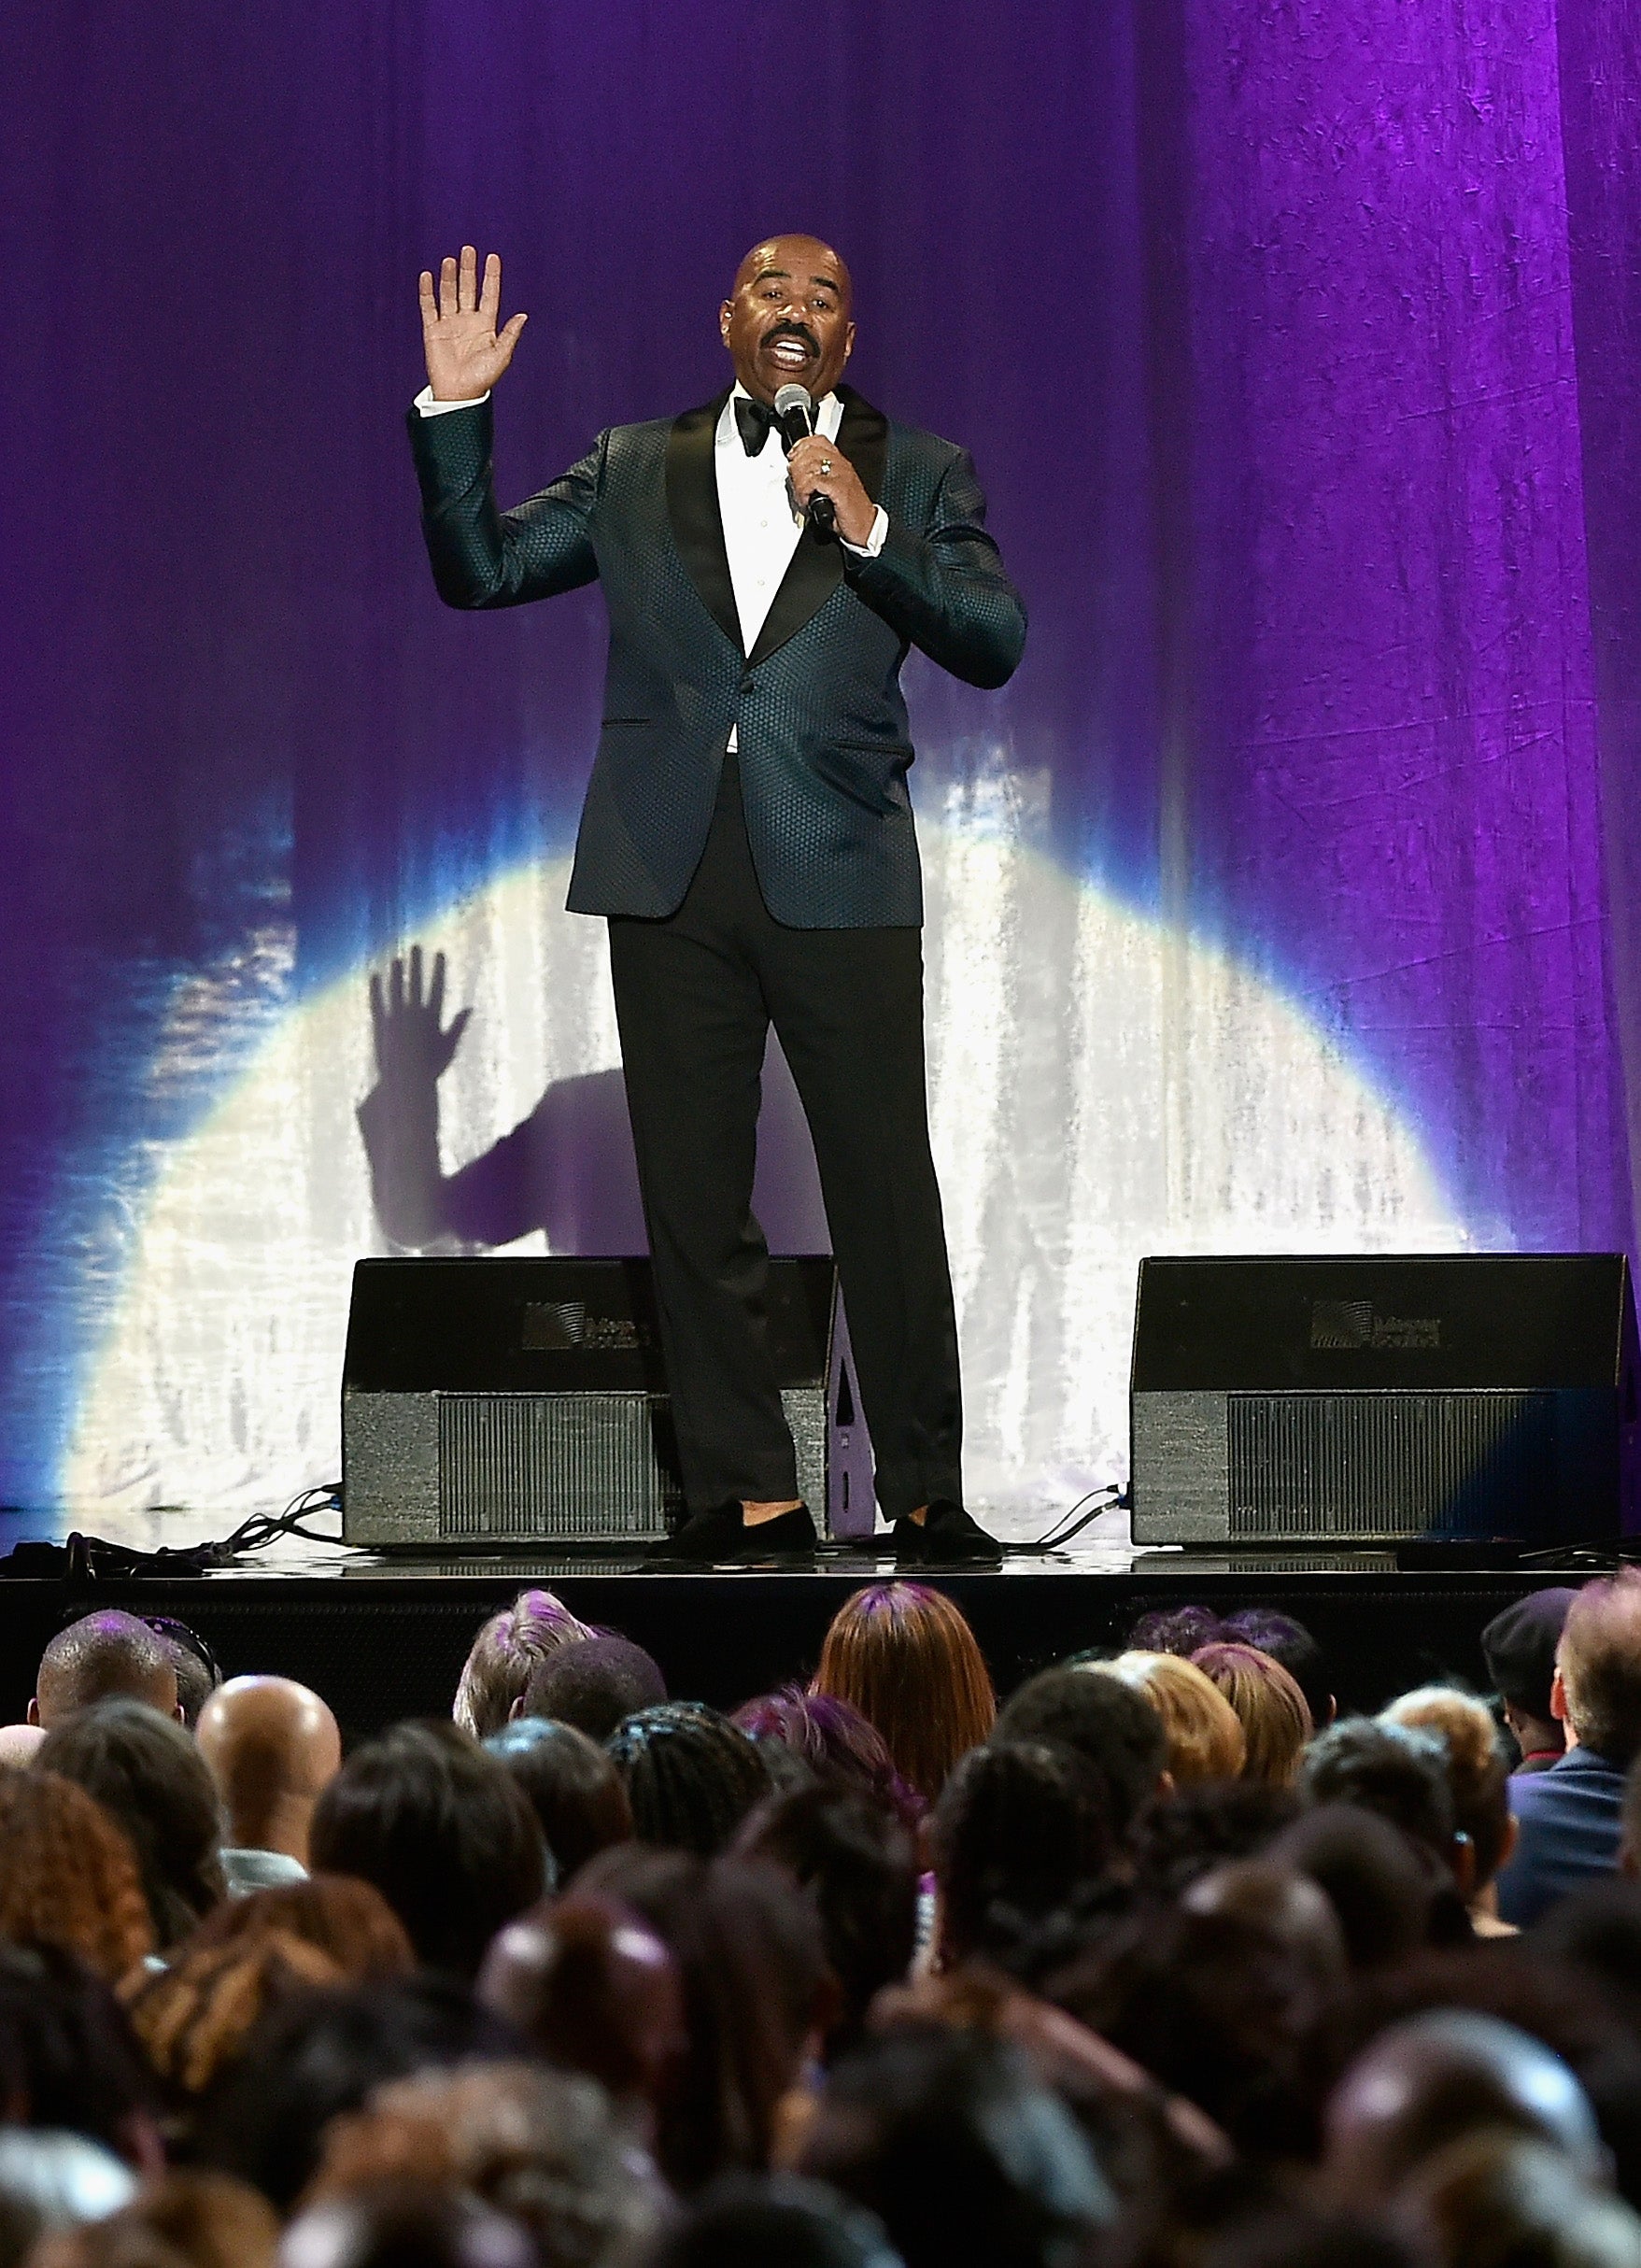 4 Major Gems On How to Succeed Against the Odds From Steve Harvey
